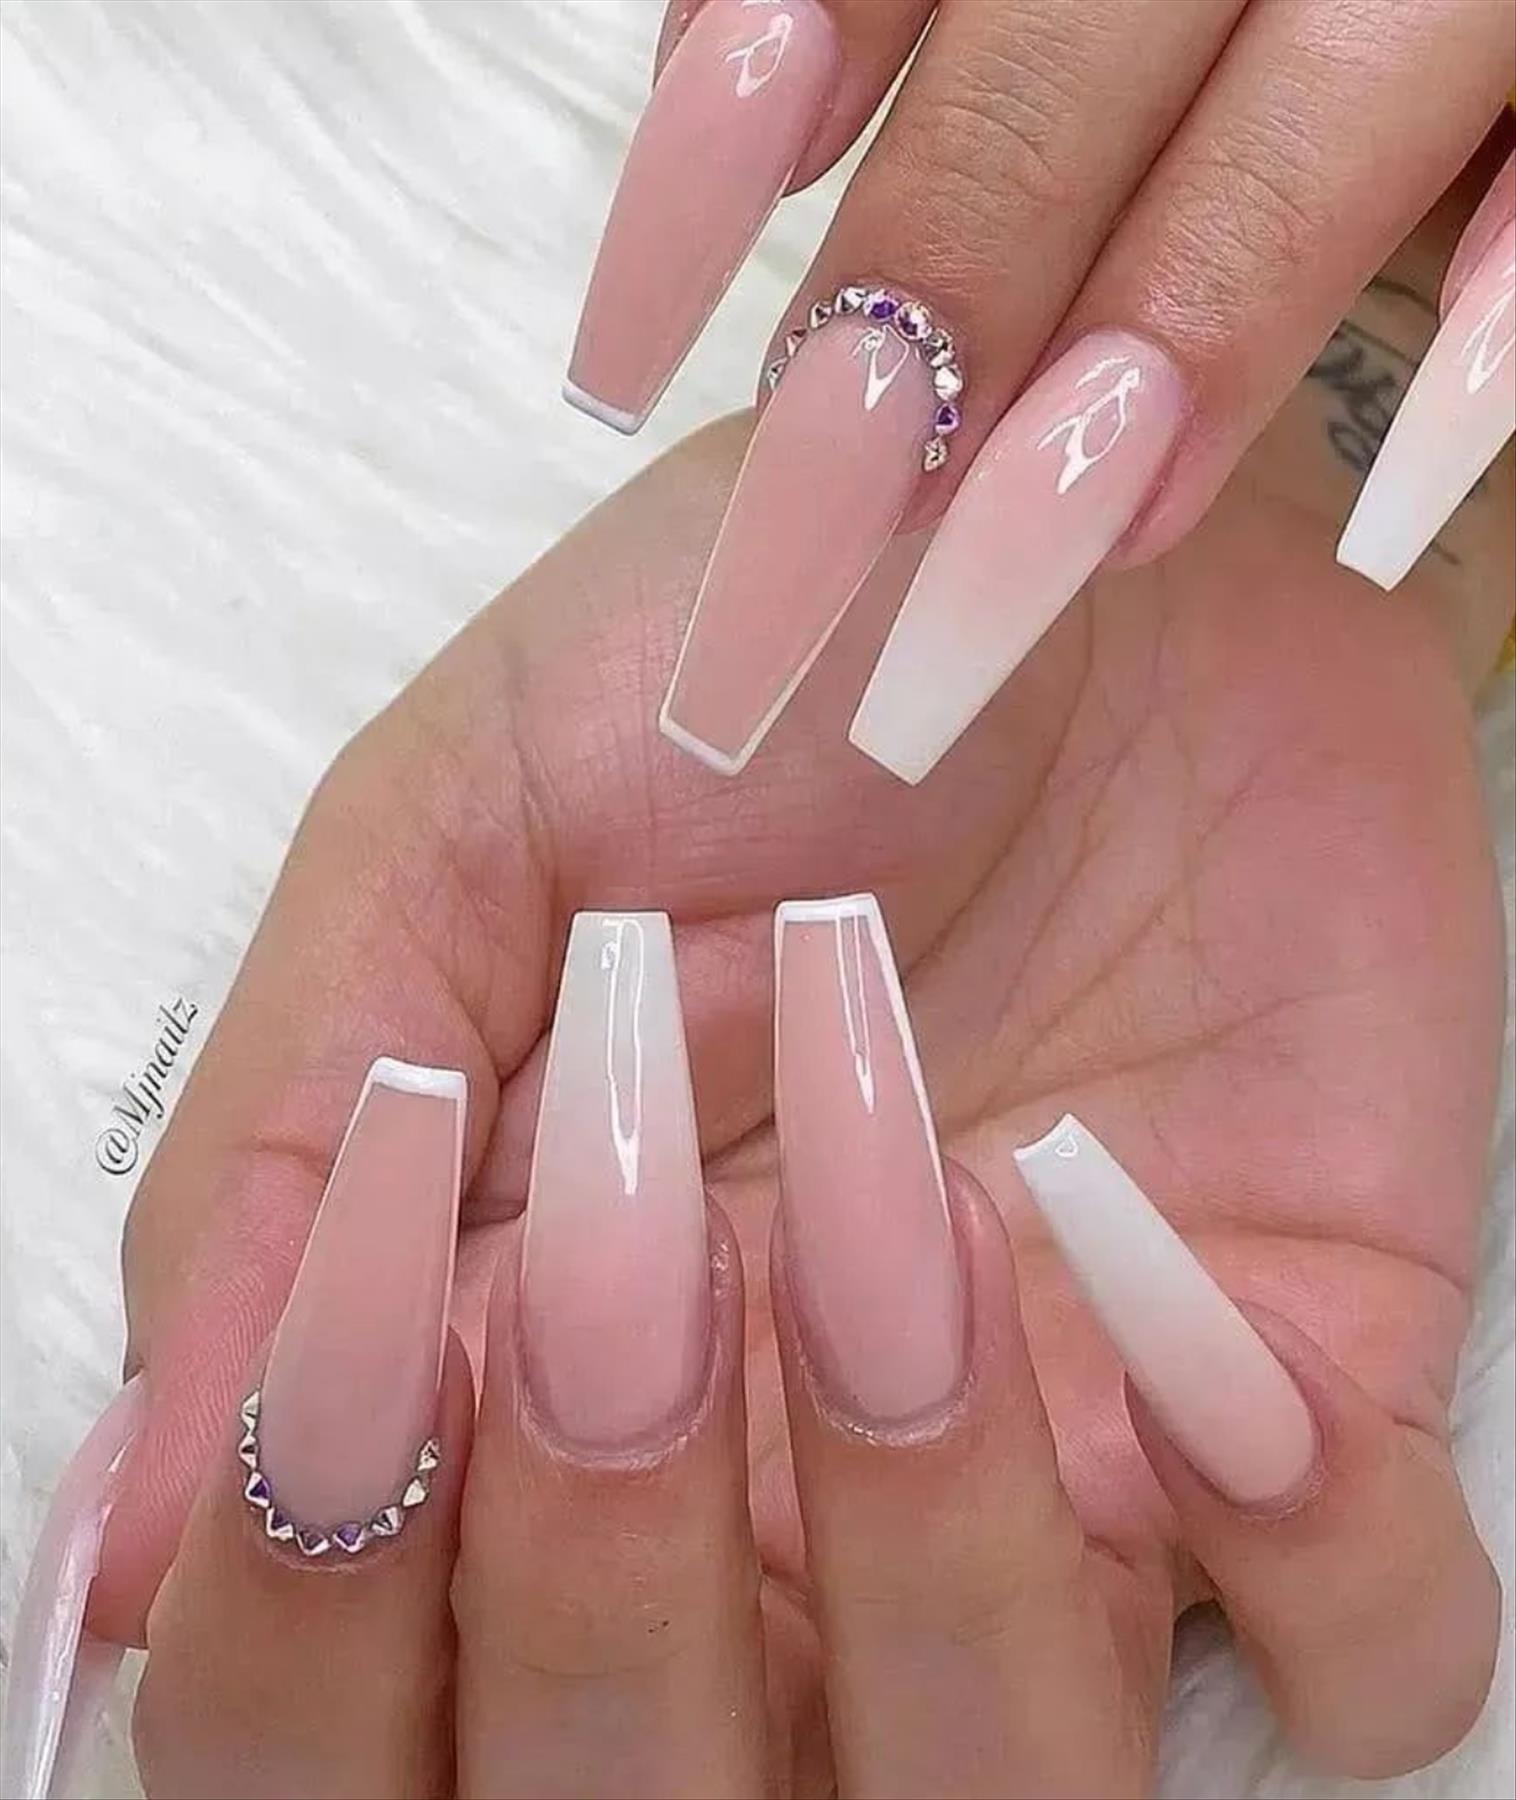 Elegant French Tip Coffin Nails You'll Love in Summer